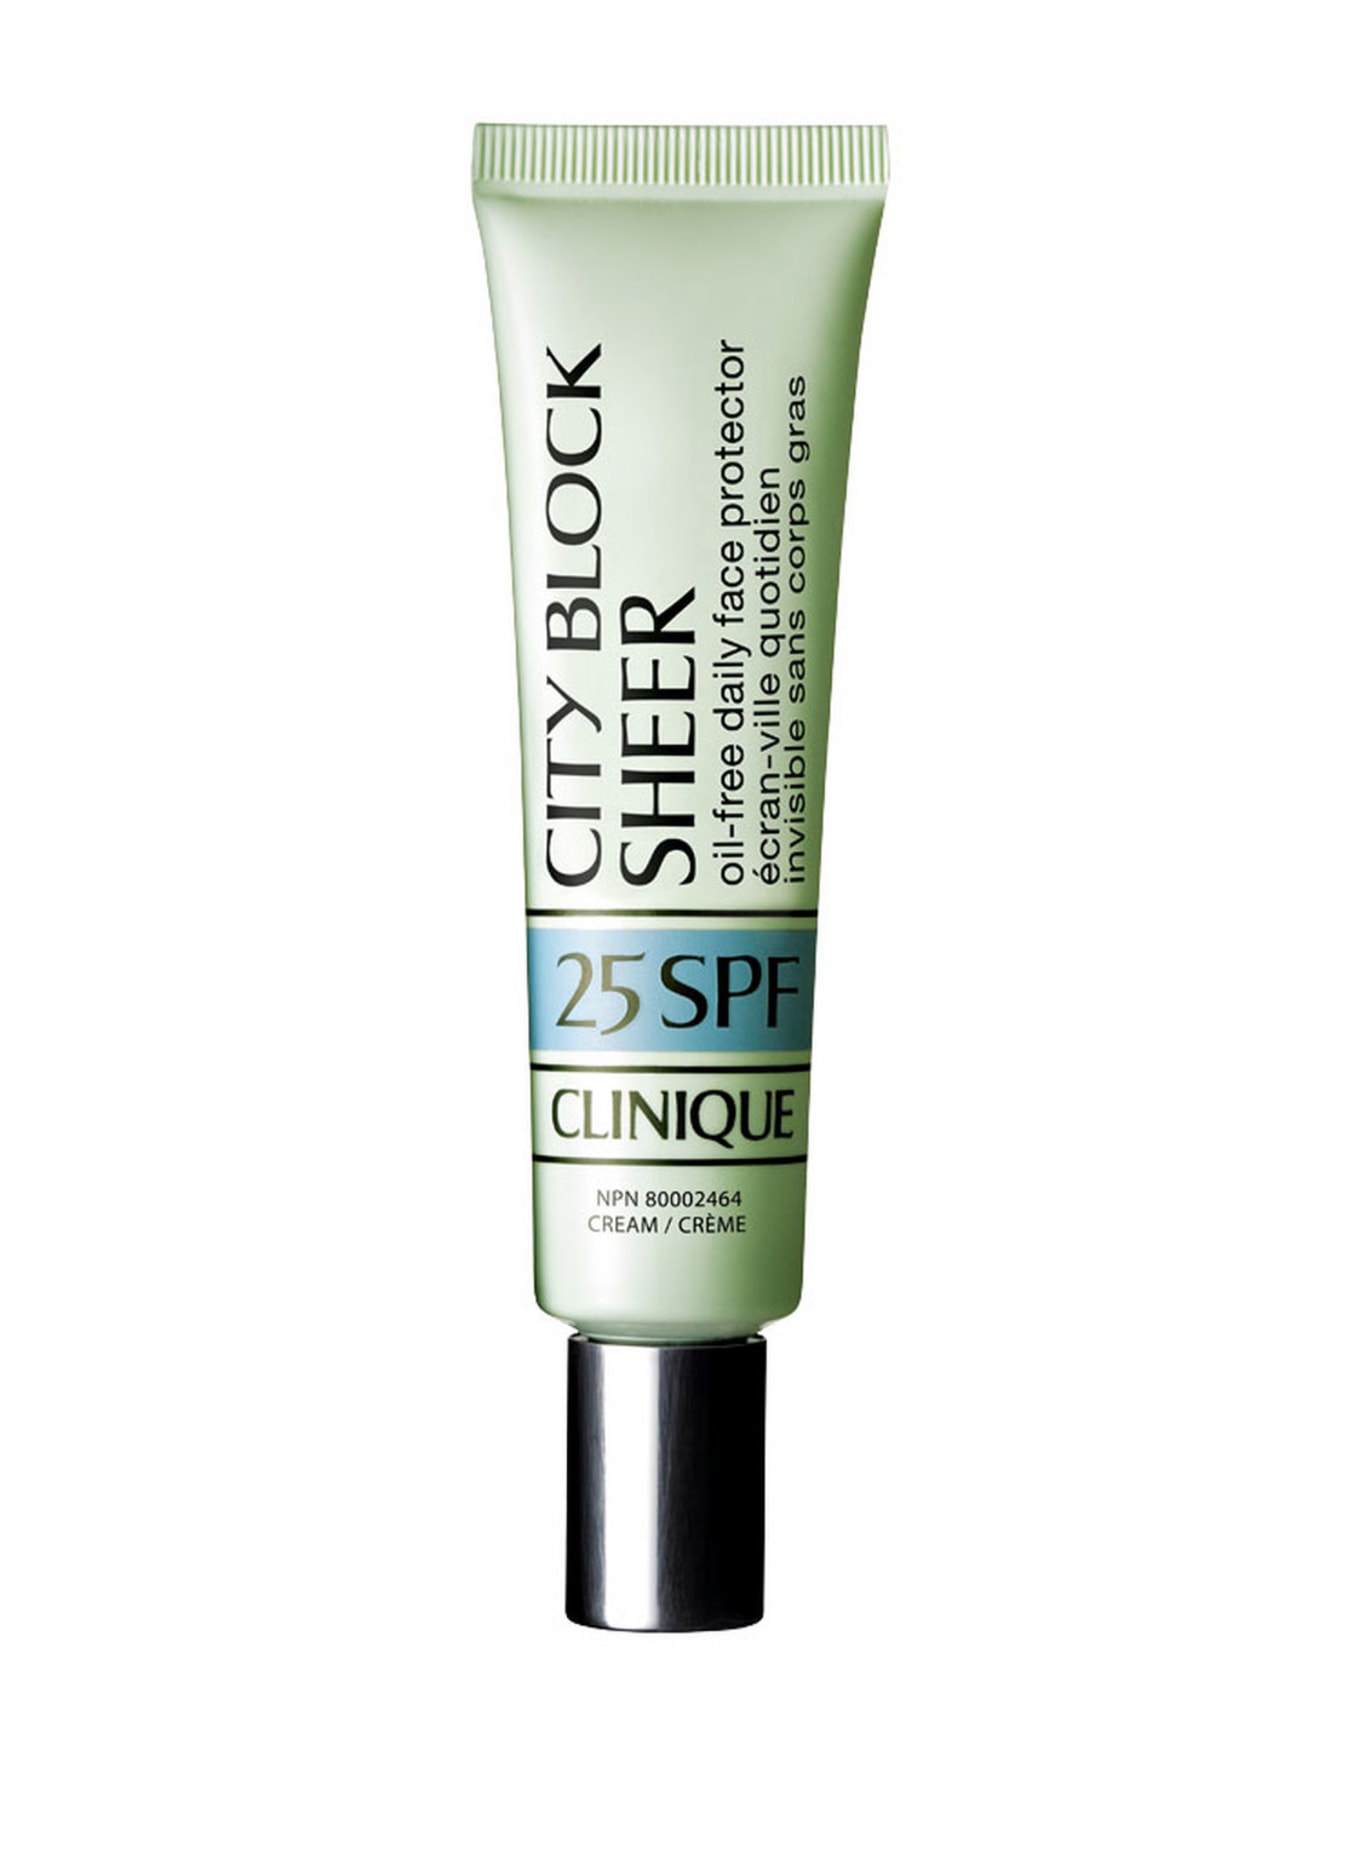 CLINIQUE CITY BLOCK SHEER OIL-FREE DAILY FACE PROTECTOR SPF 25 (Obrazek 1)